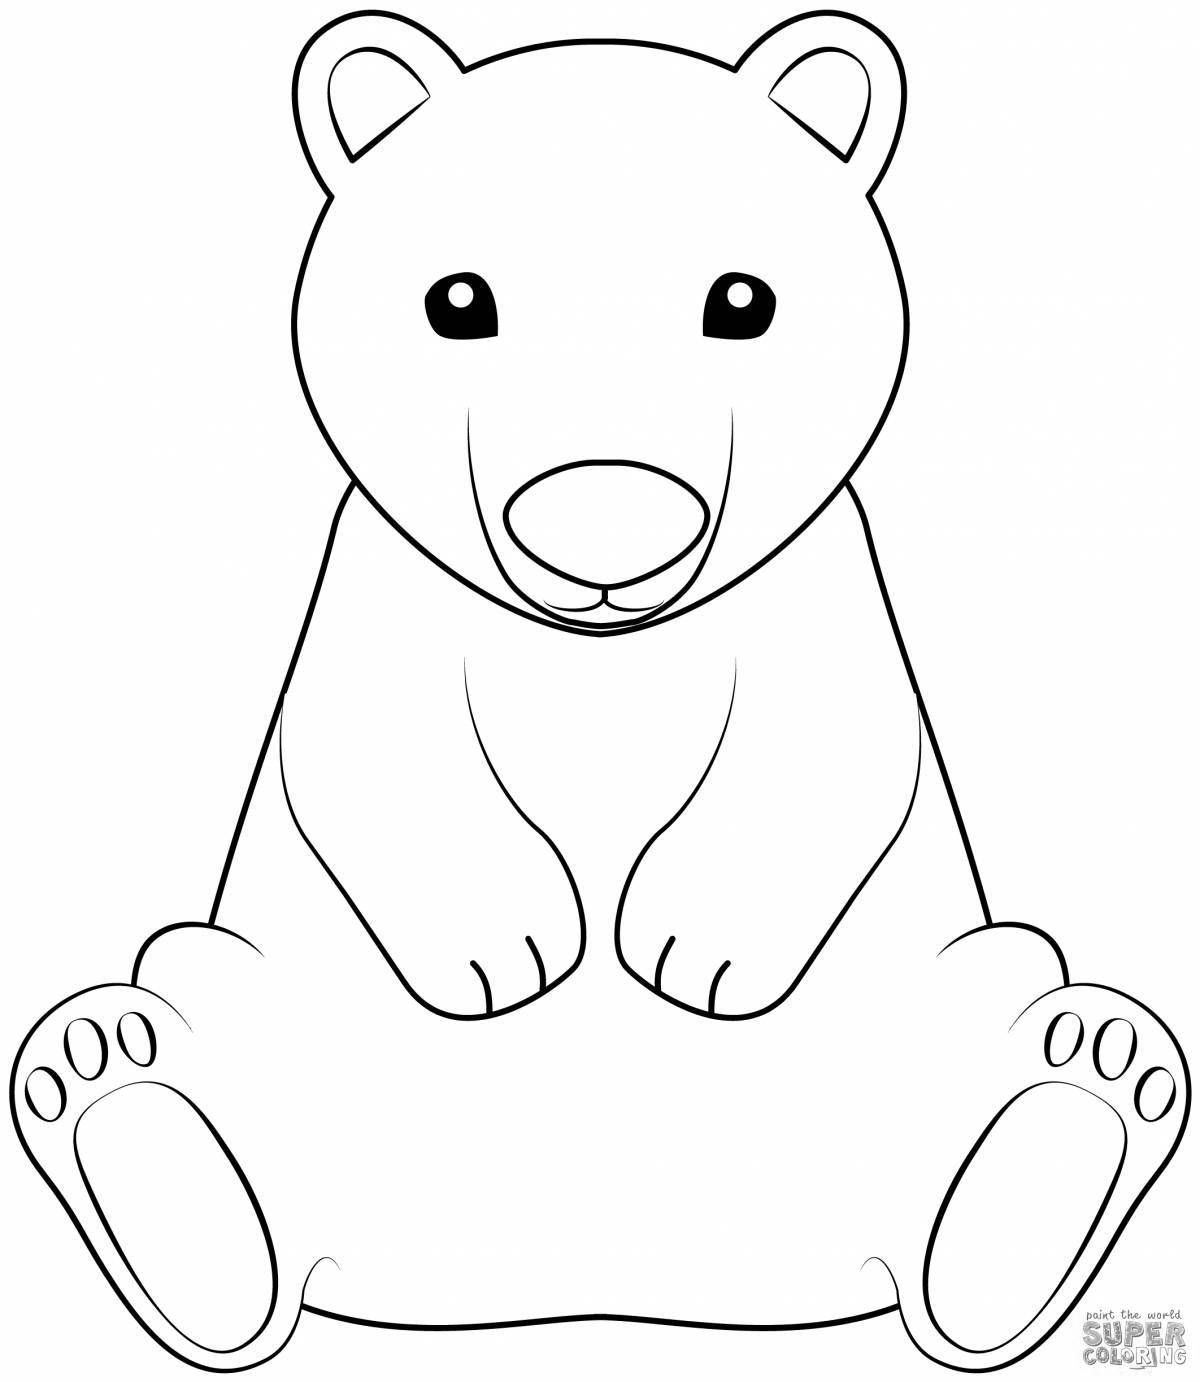 Cute polar bear coloring for children 5-6 years old